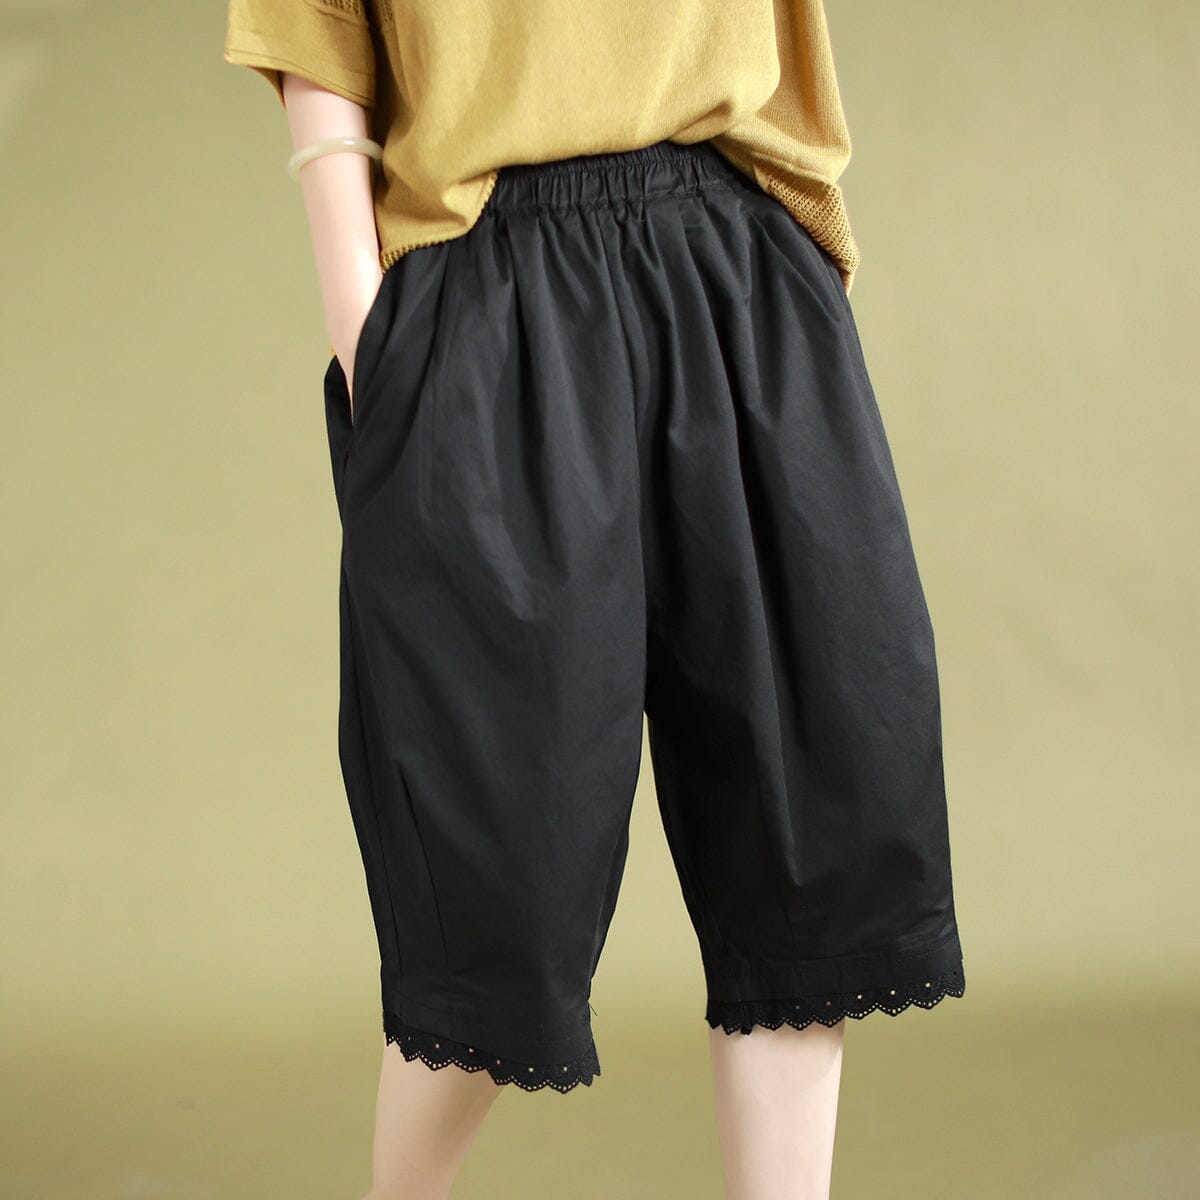 Summer Solid Cotton Trim Casual Shorts